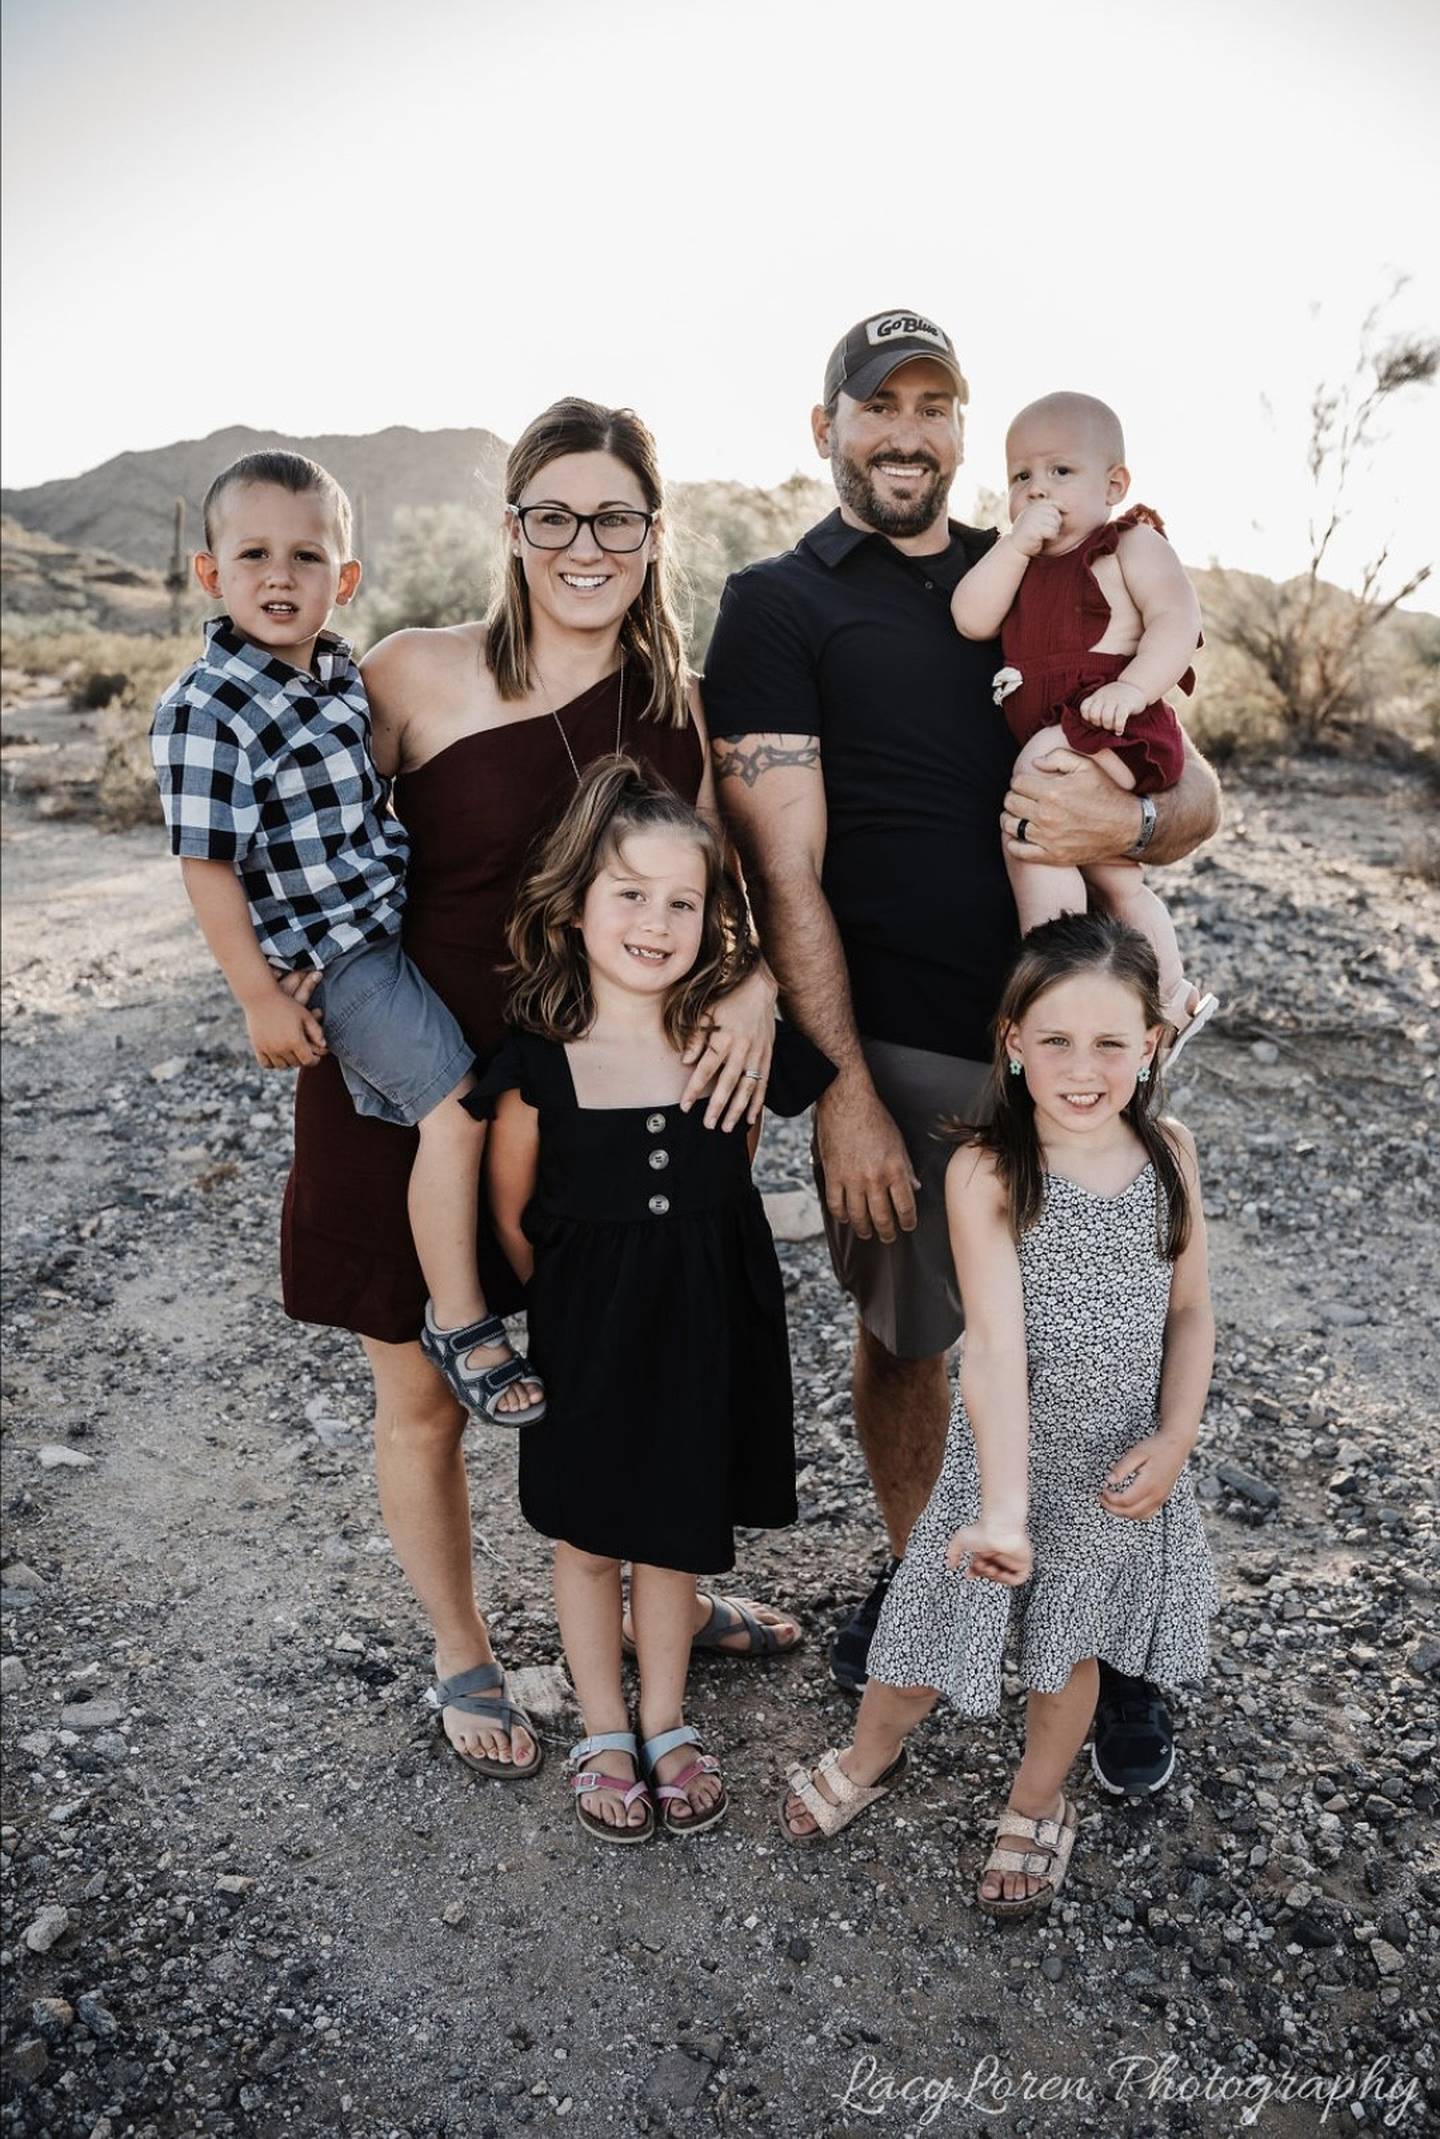 Being a husband and father is at the top of the list of things Jeremy Rutledge is most proud of in his life. Jeremey and his wife, Lauran, have four children, Kenna, 7; Sterling, 6; Robert Lyndon, 5; and Nolyn, 2.